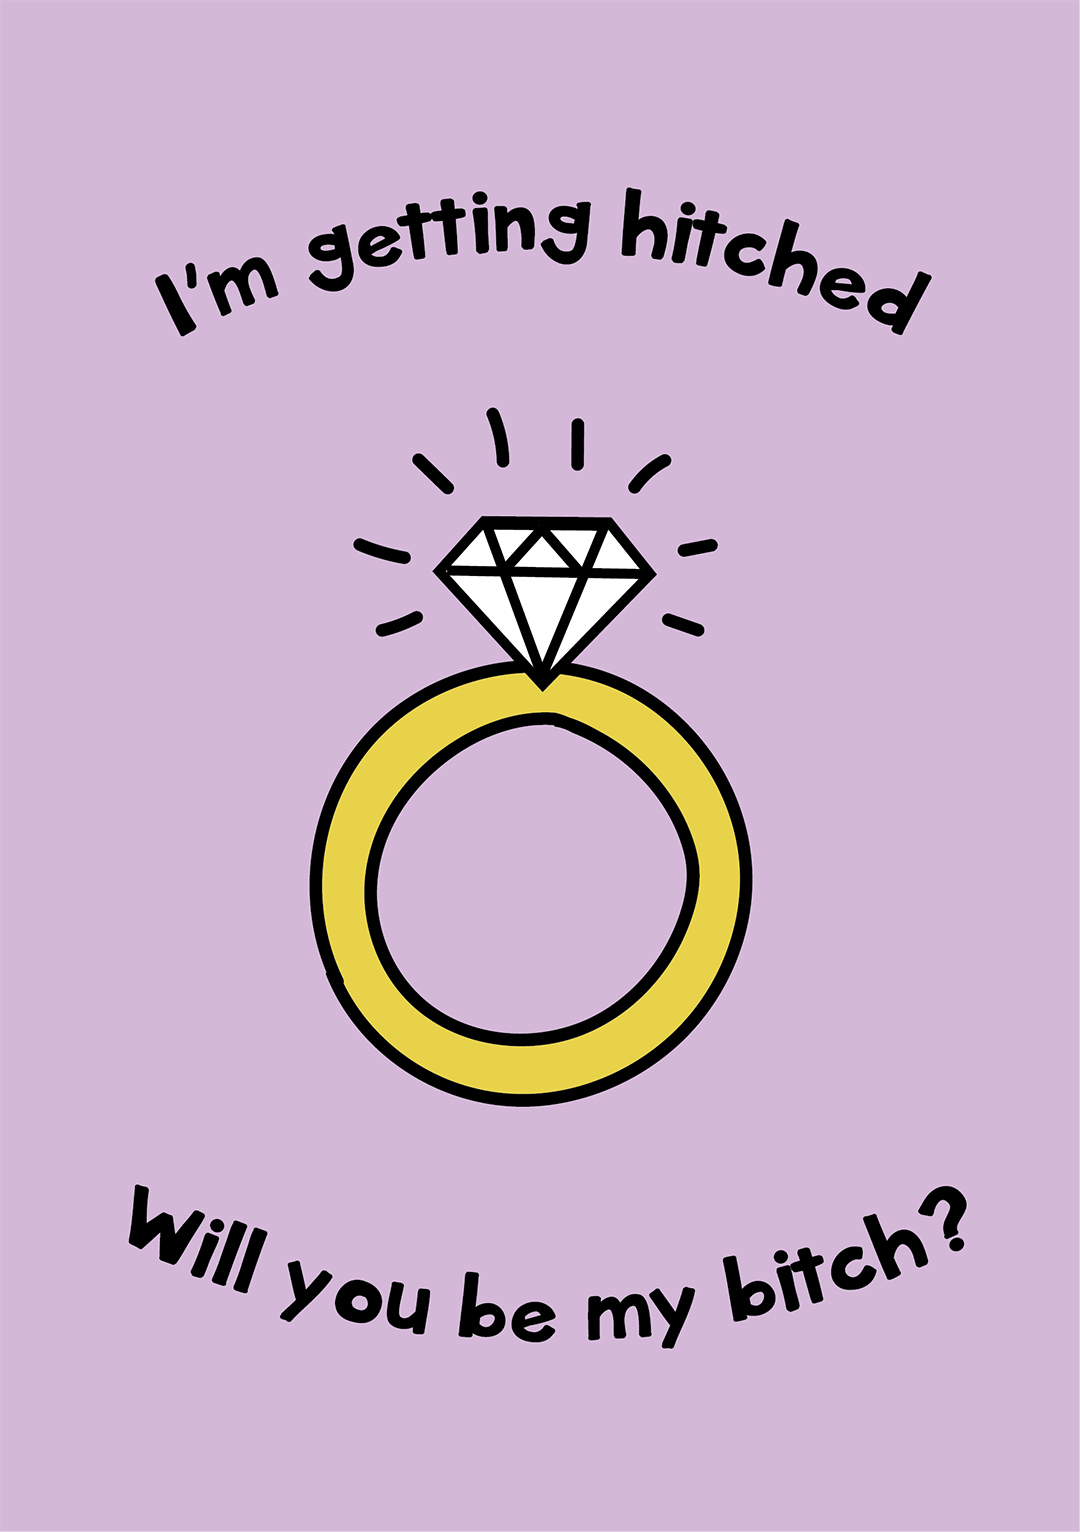 I'm Getting Hitched, Will You Be My Bitch?